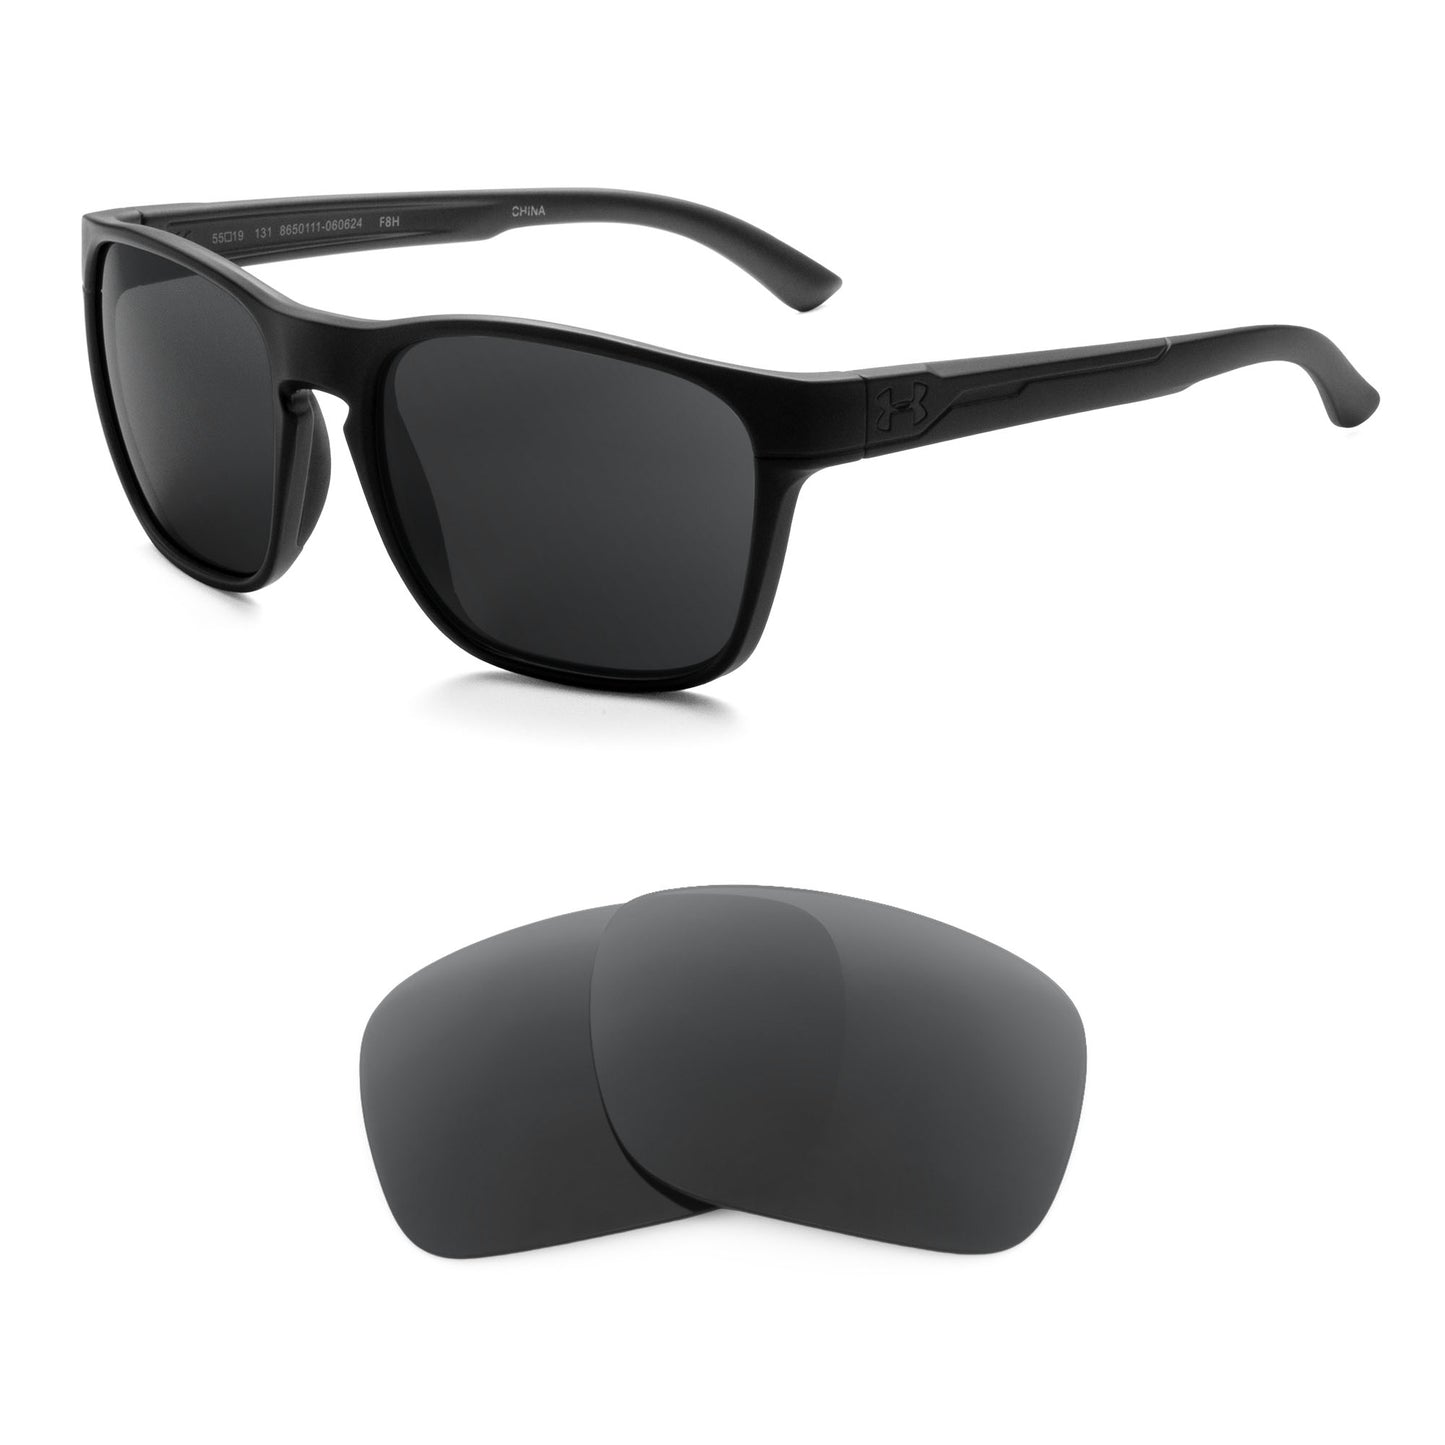 Under Armour Glimpse sunglasses with replacement lenses